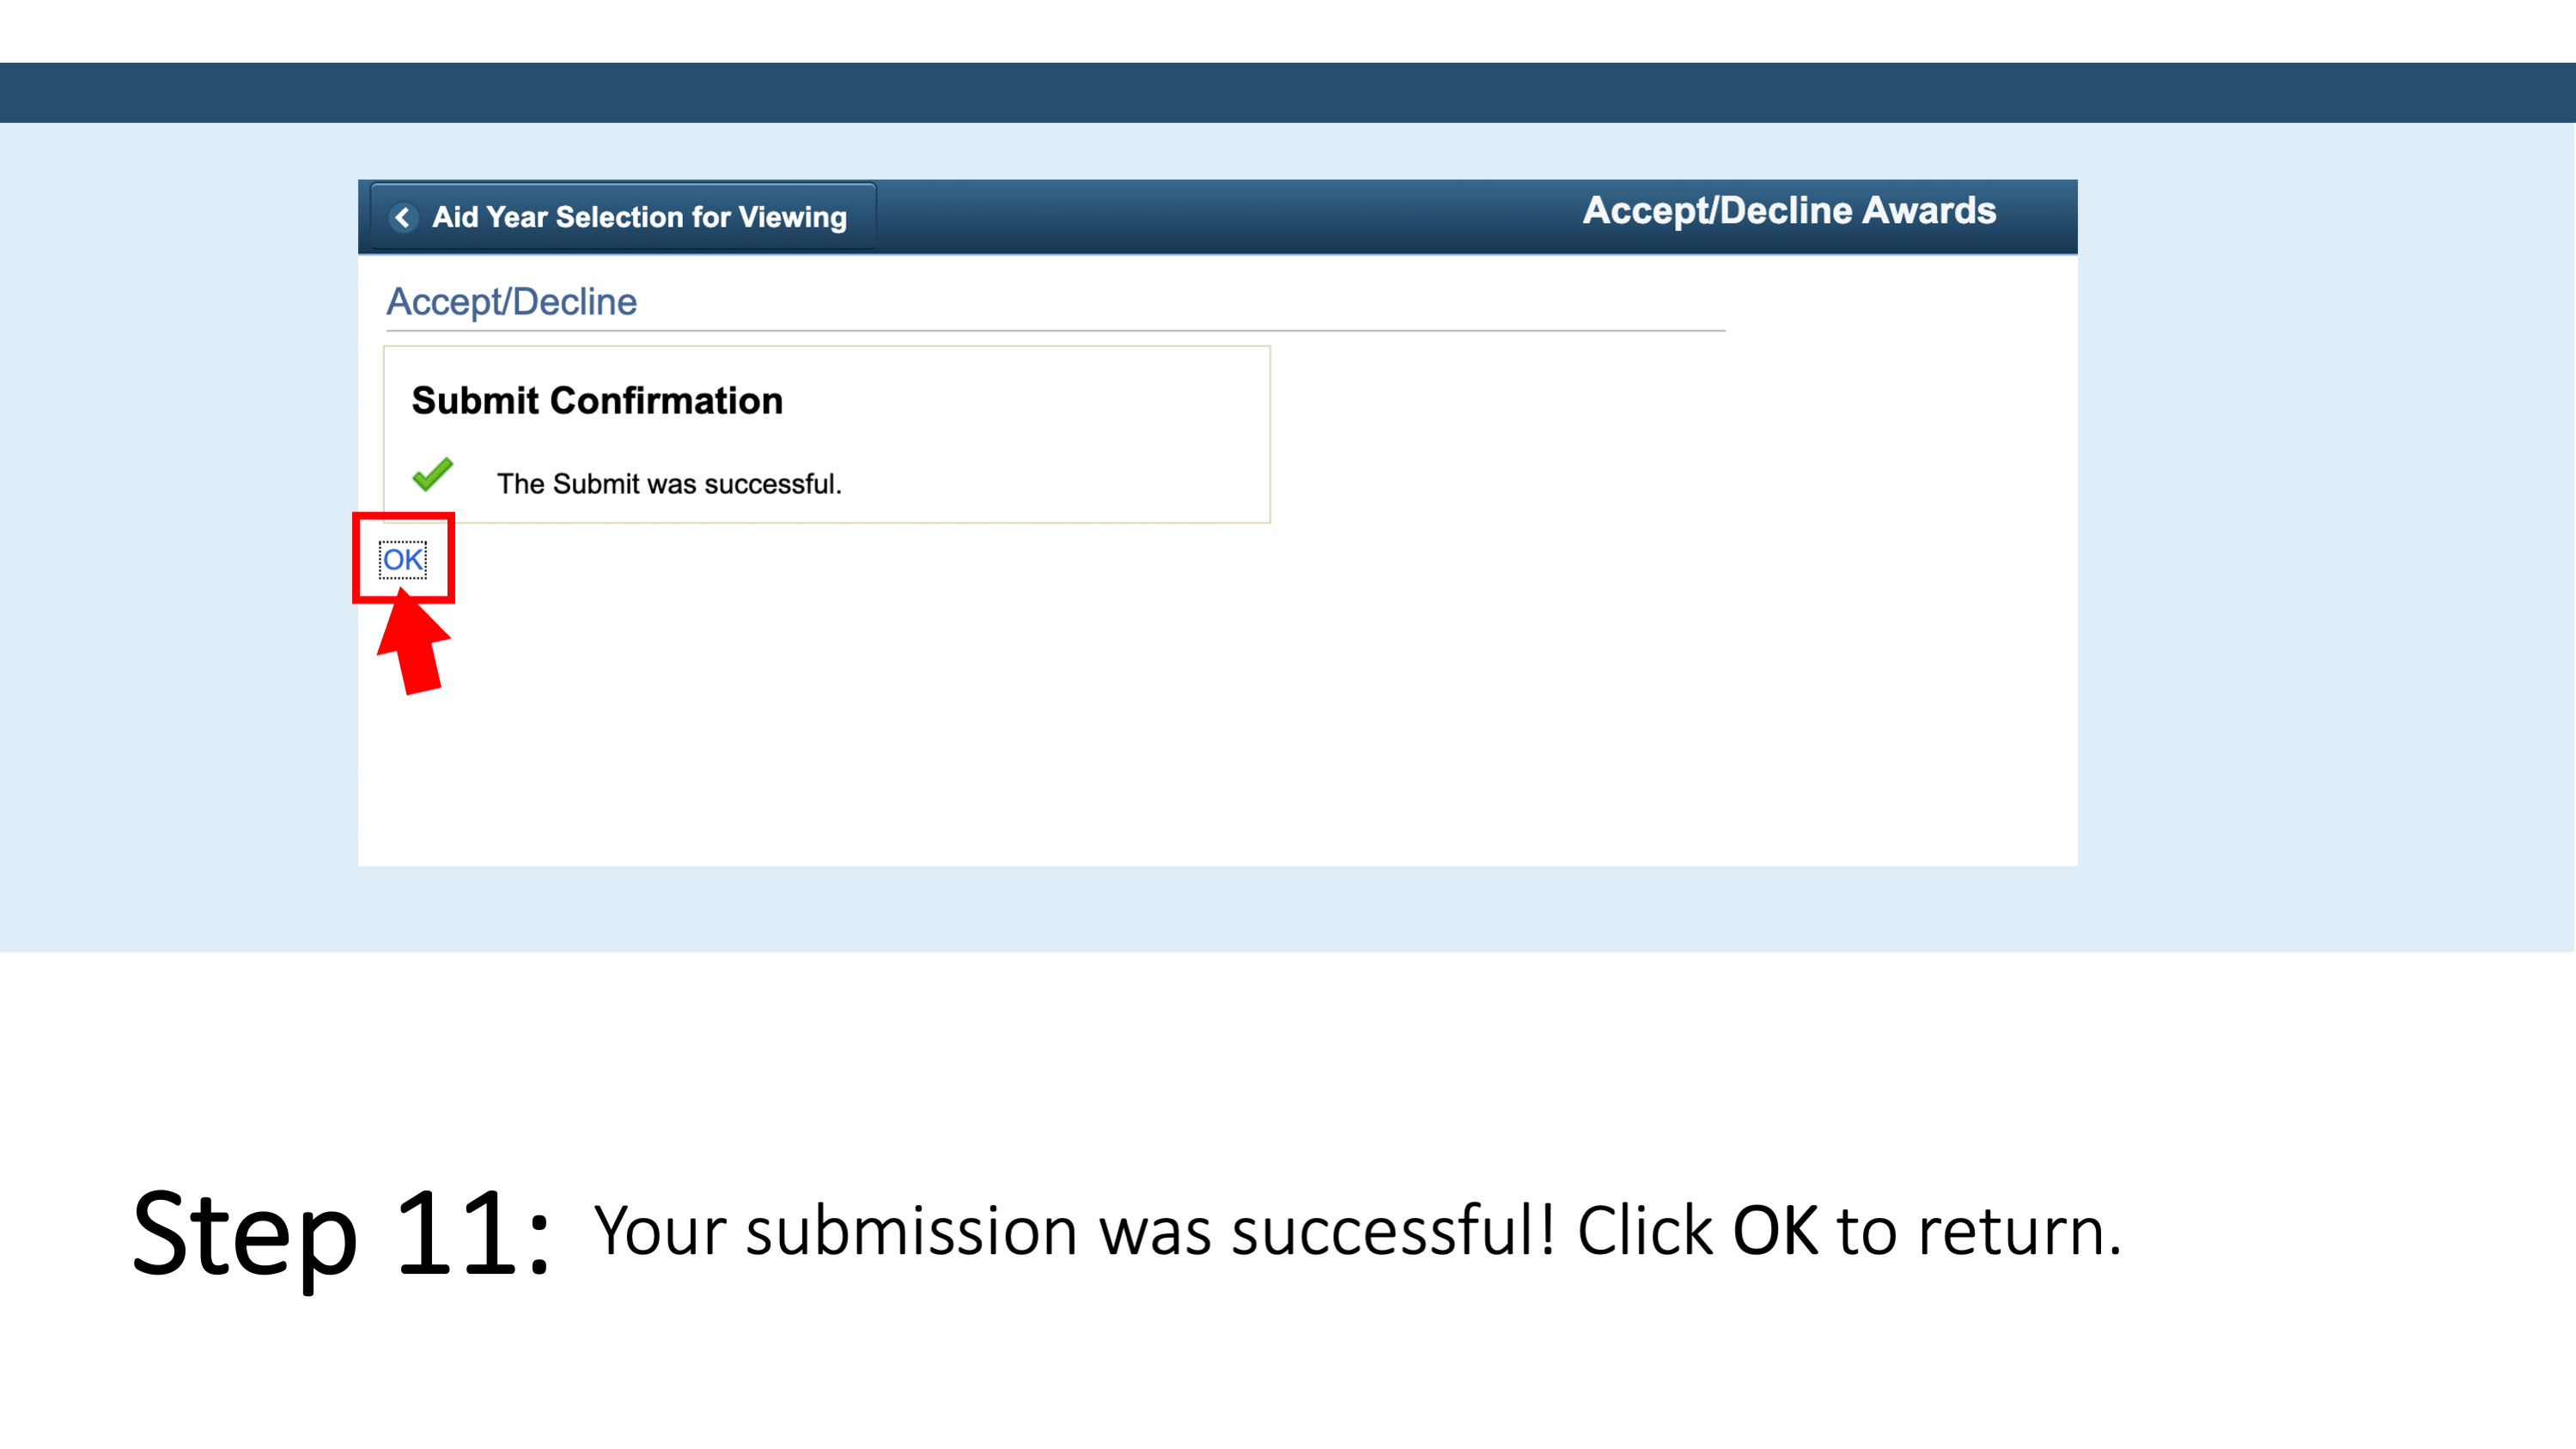 Step 11: Your submission was successful! Click OK to return.